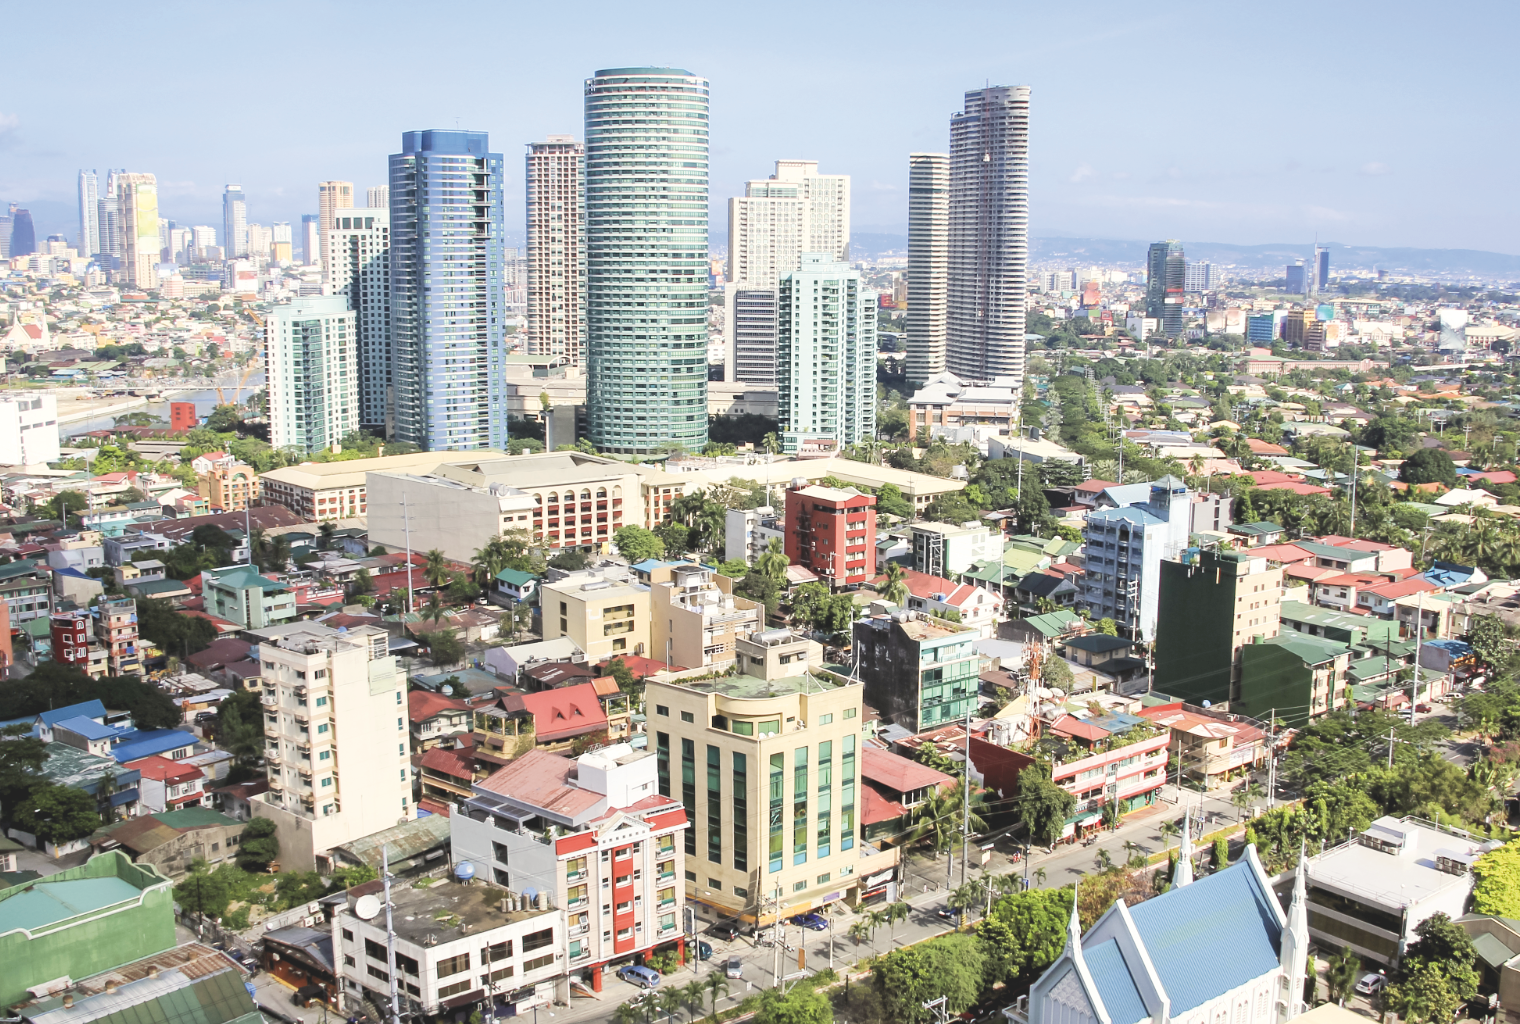 48 Cryptocurrency Exchanges Now Approved in the Philippines